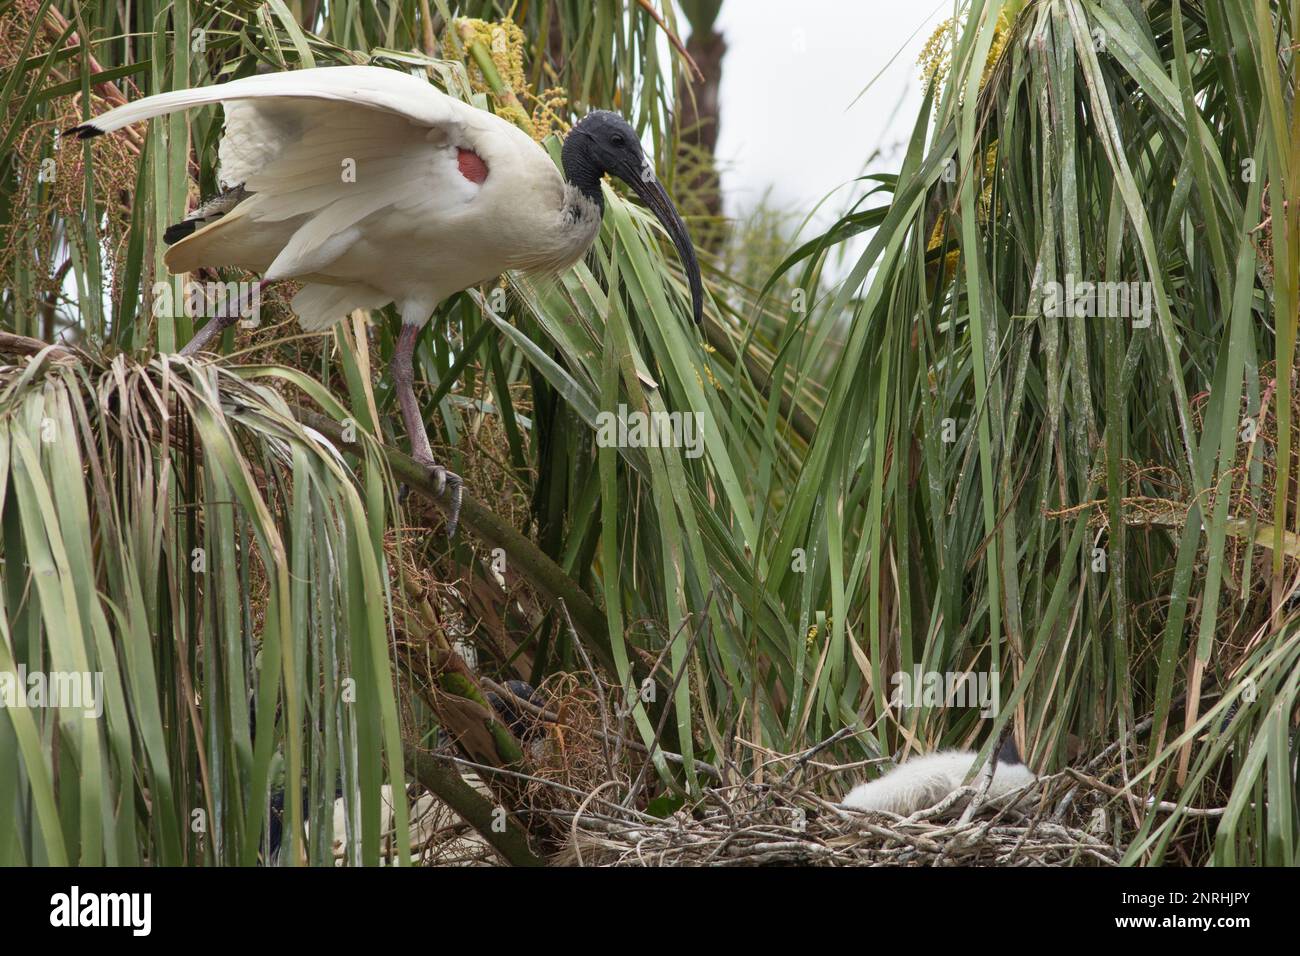 Australian White Ibis at its nest in a palm tree caring for a single chick. Stock Photo